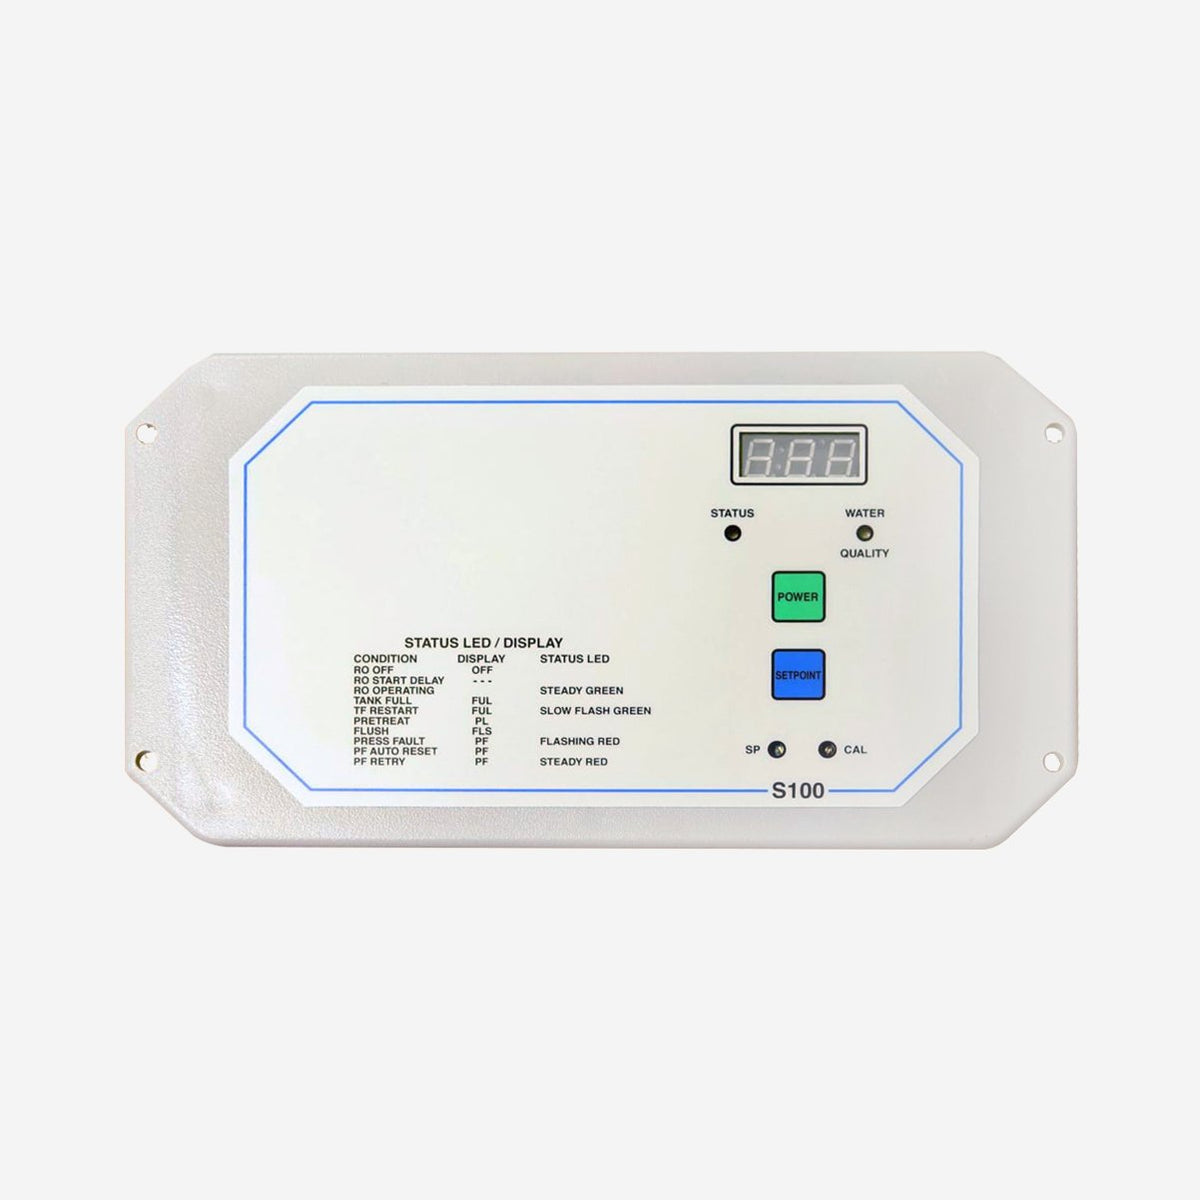 C-100 Reverse Osmosis System Control Panel - Control Panel - Crystal Quest